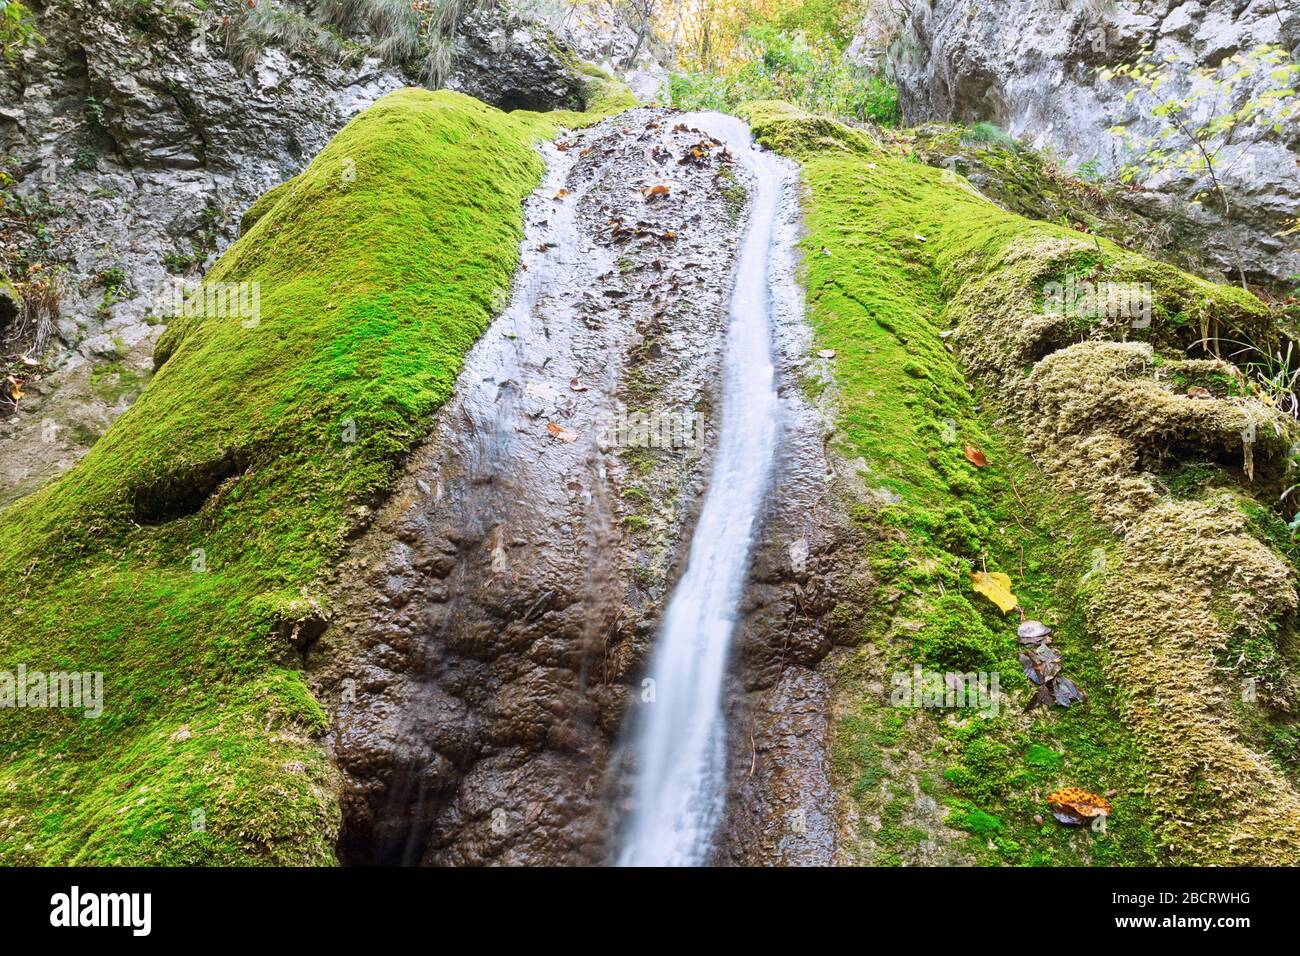 close up of Susara waterfall in Anina mountains, Romania Stock Photo